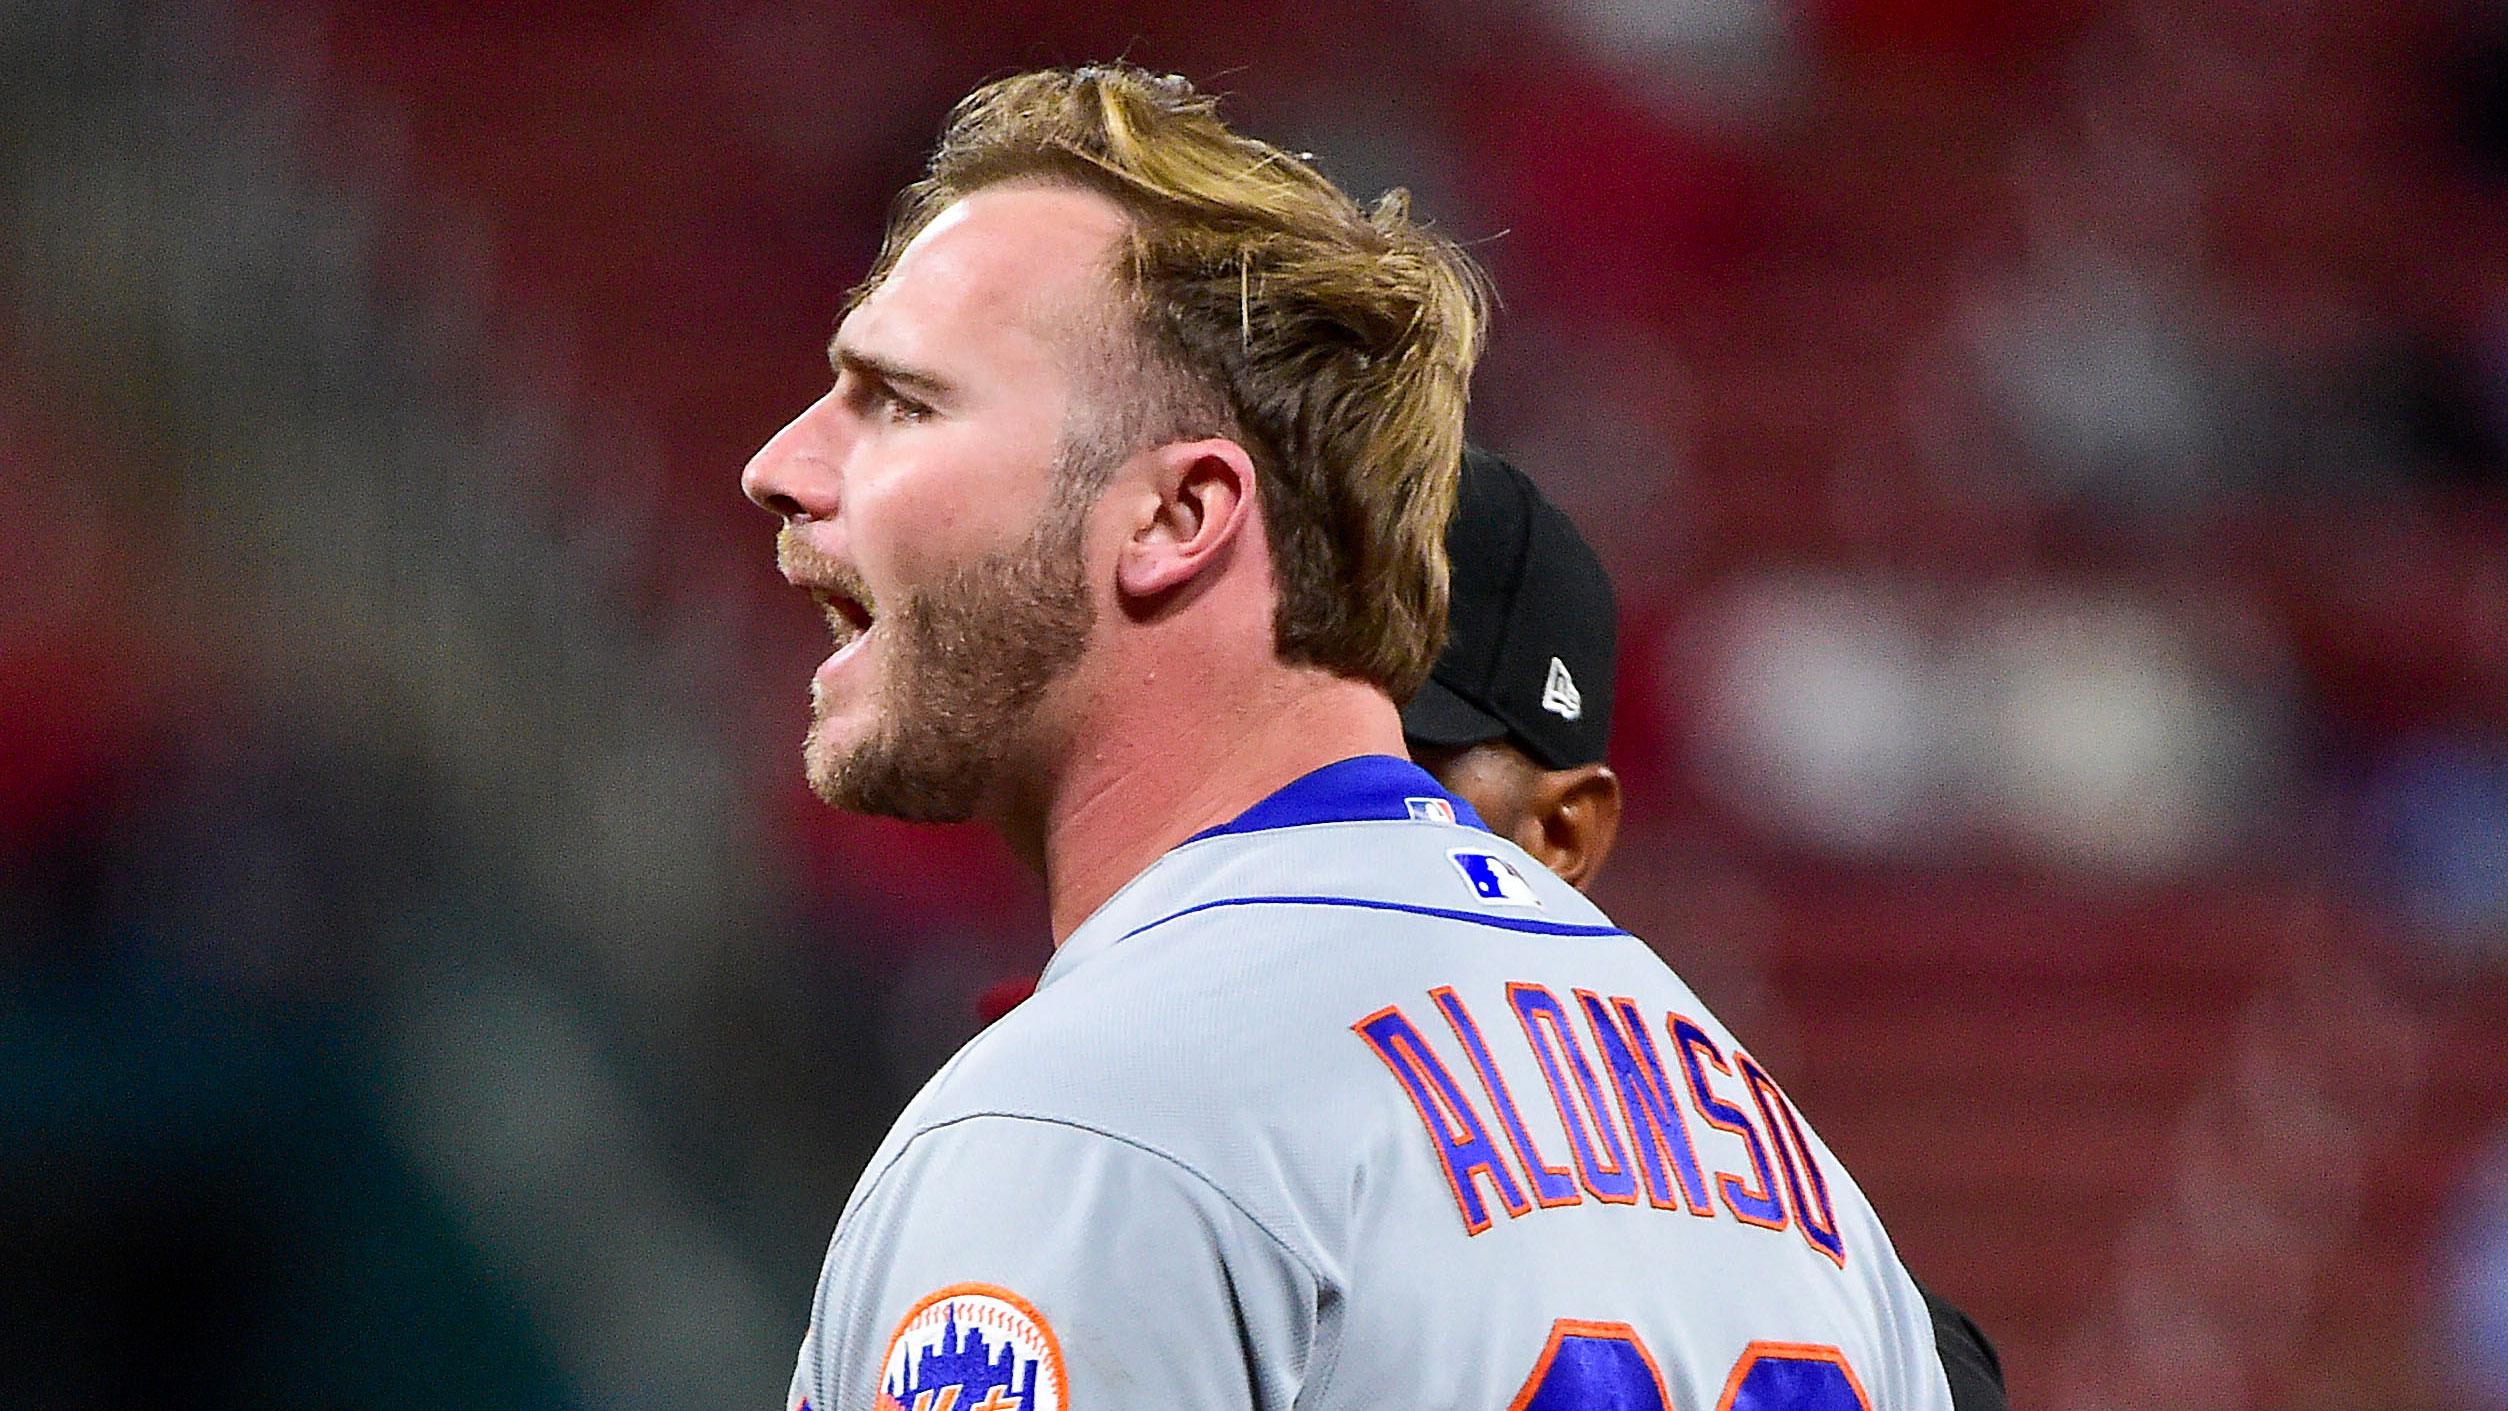 Apr 26, 2022; St. Louis, Missouri, USA; New York Mets designated hitter Pete Alonso (20) reacts after he was hit in the head from a pitch by from St. Louis Cardinals relief pitcher Kodi Whitley (not pictured) during the eighth inning at Busch Stadium. / Jeff Curry-USA TODAY Sports